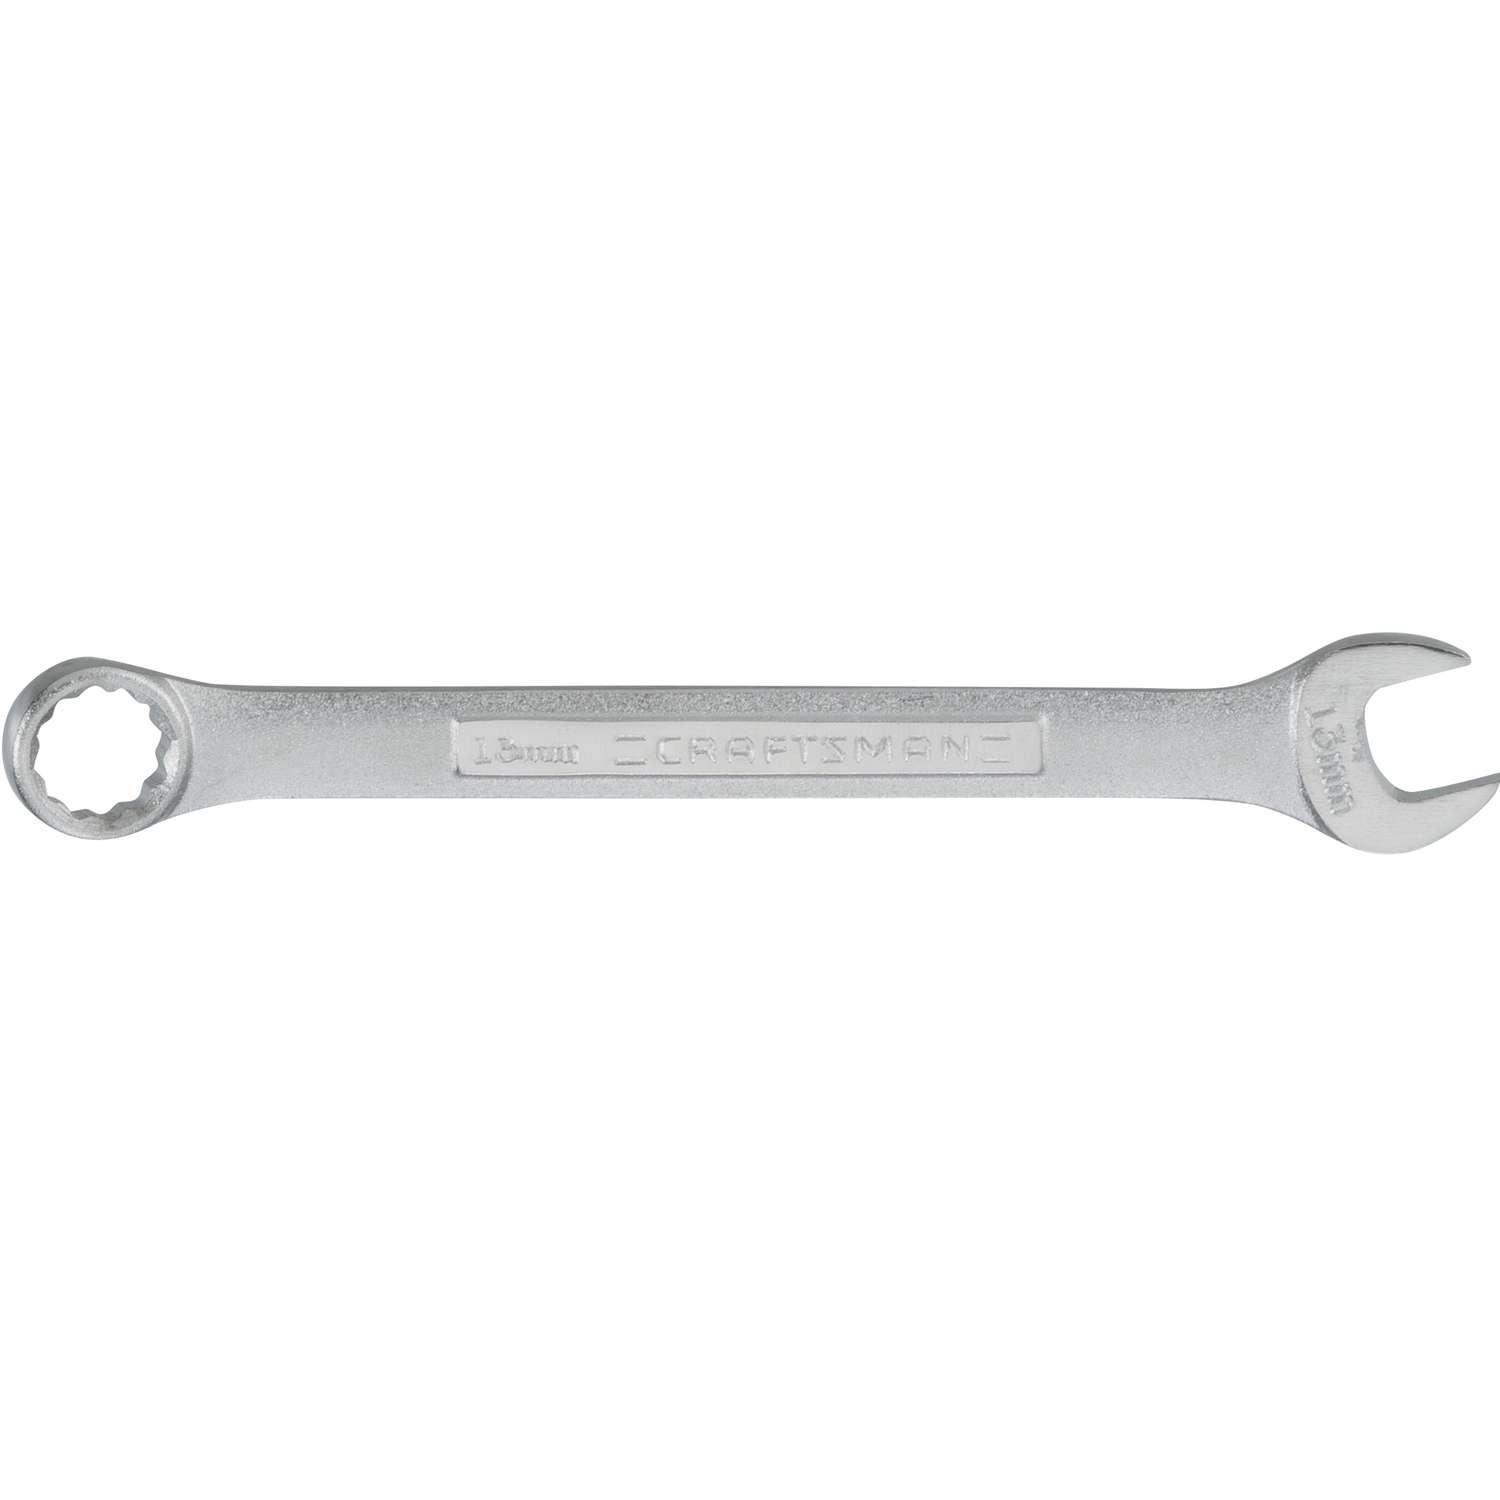 Details about   Craftsman 13mm Wrench Locking Flex Ratcheting Combination Tool Alloy Steel 42480 